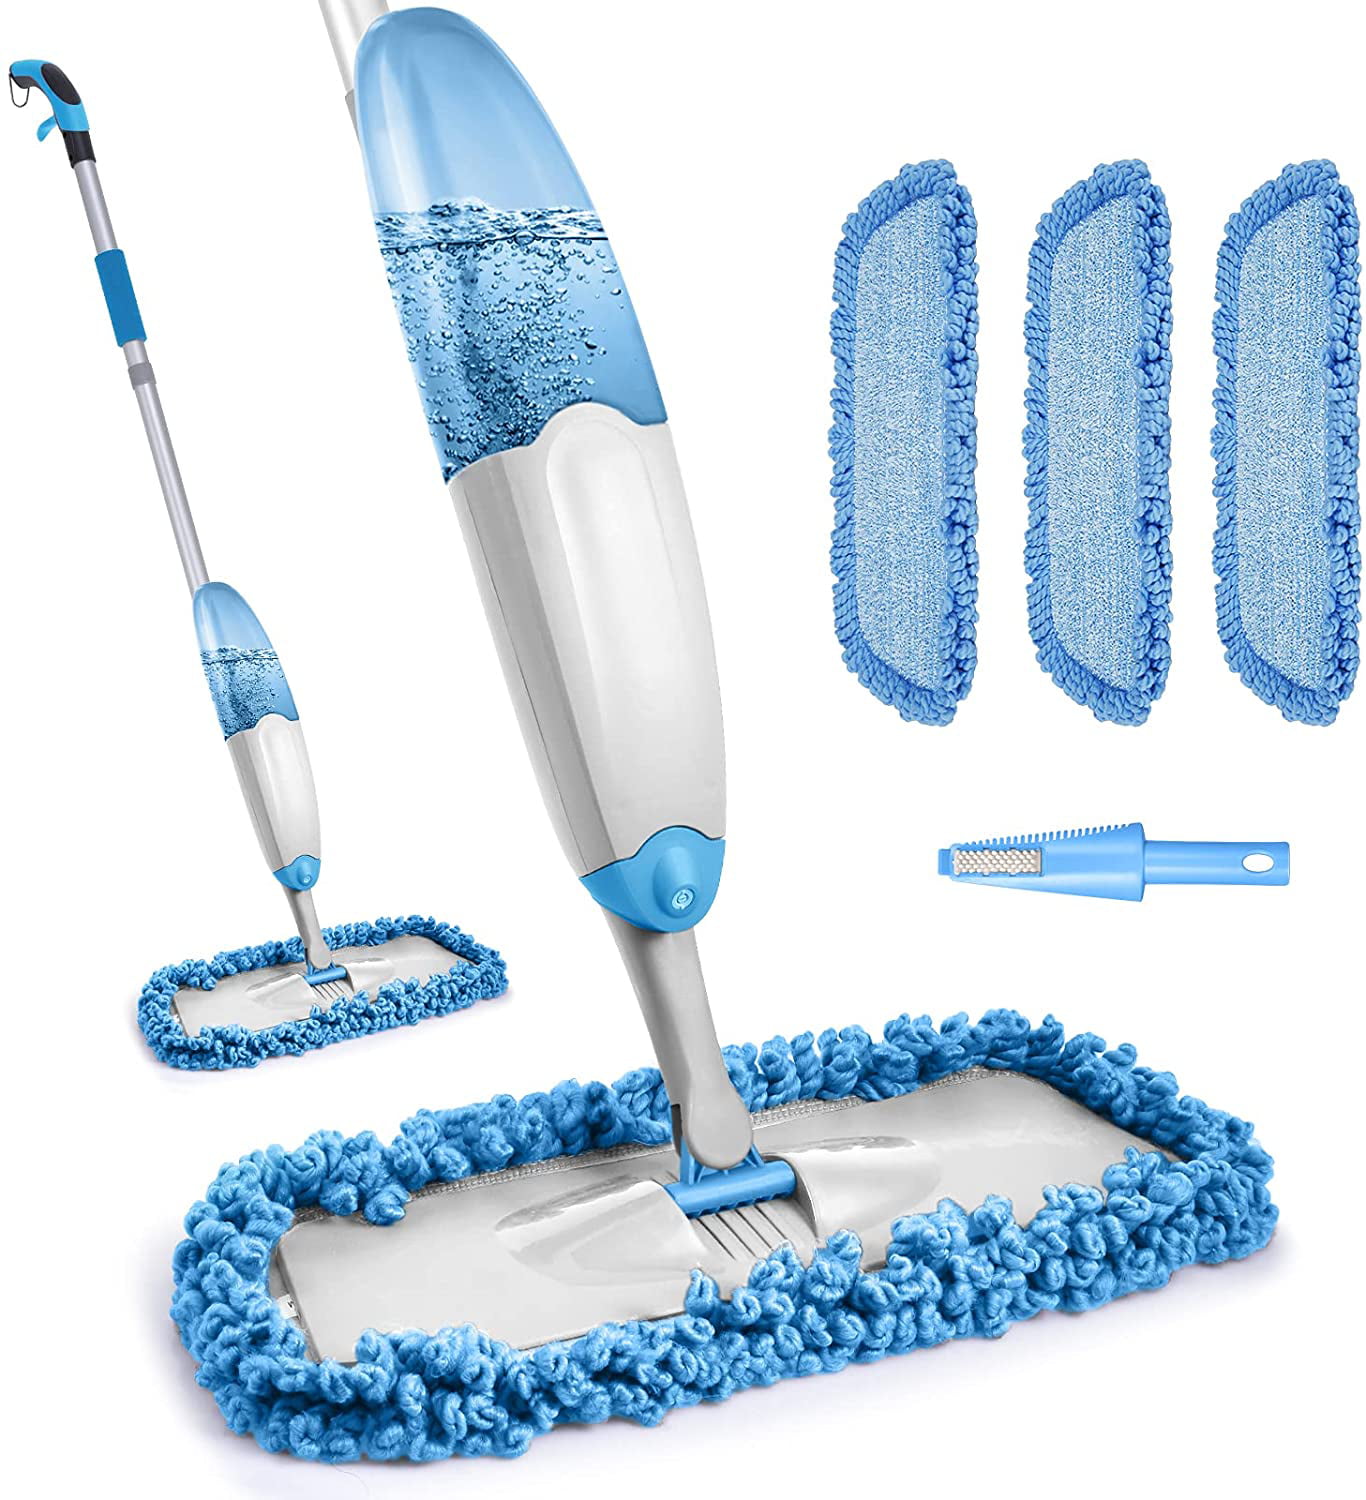 Hardwood Tile Microfiber Spray Mop with Total 3 Washable Mop Pad Wet And Dry Mop 